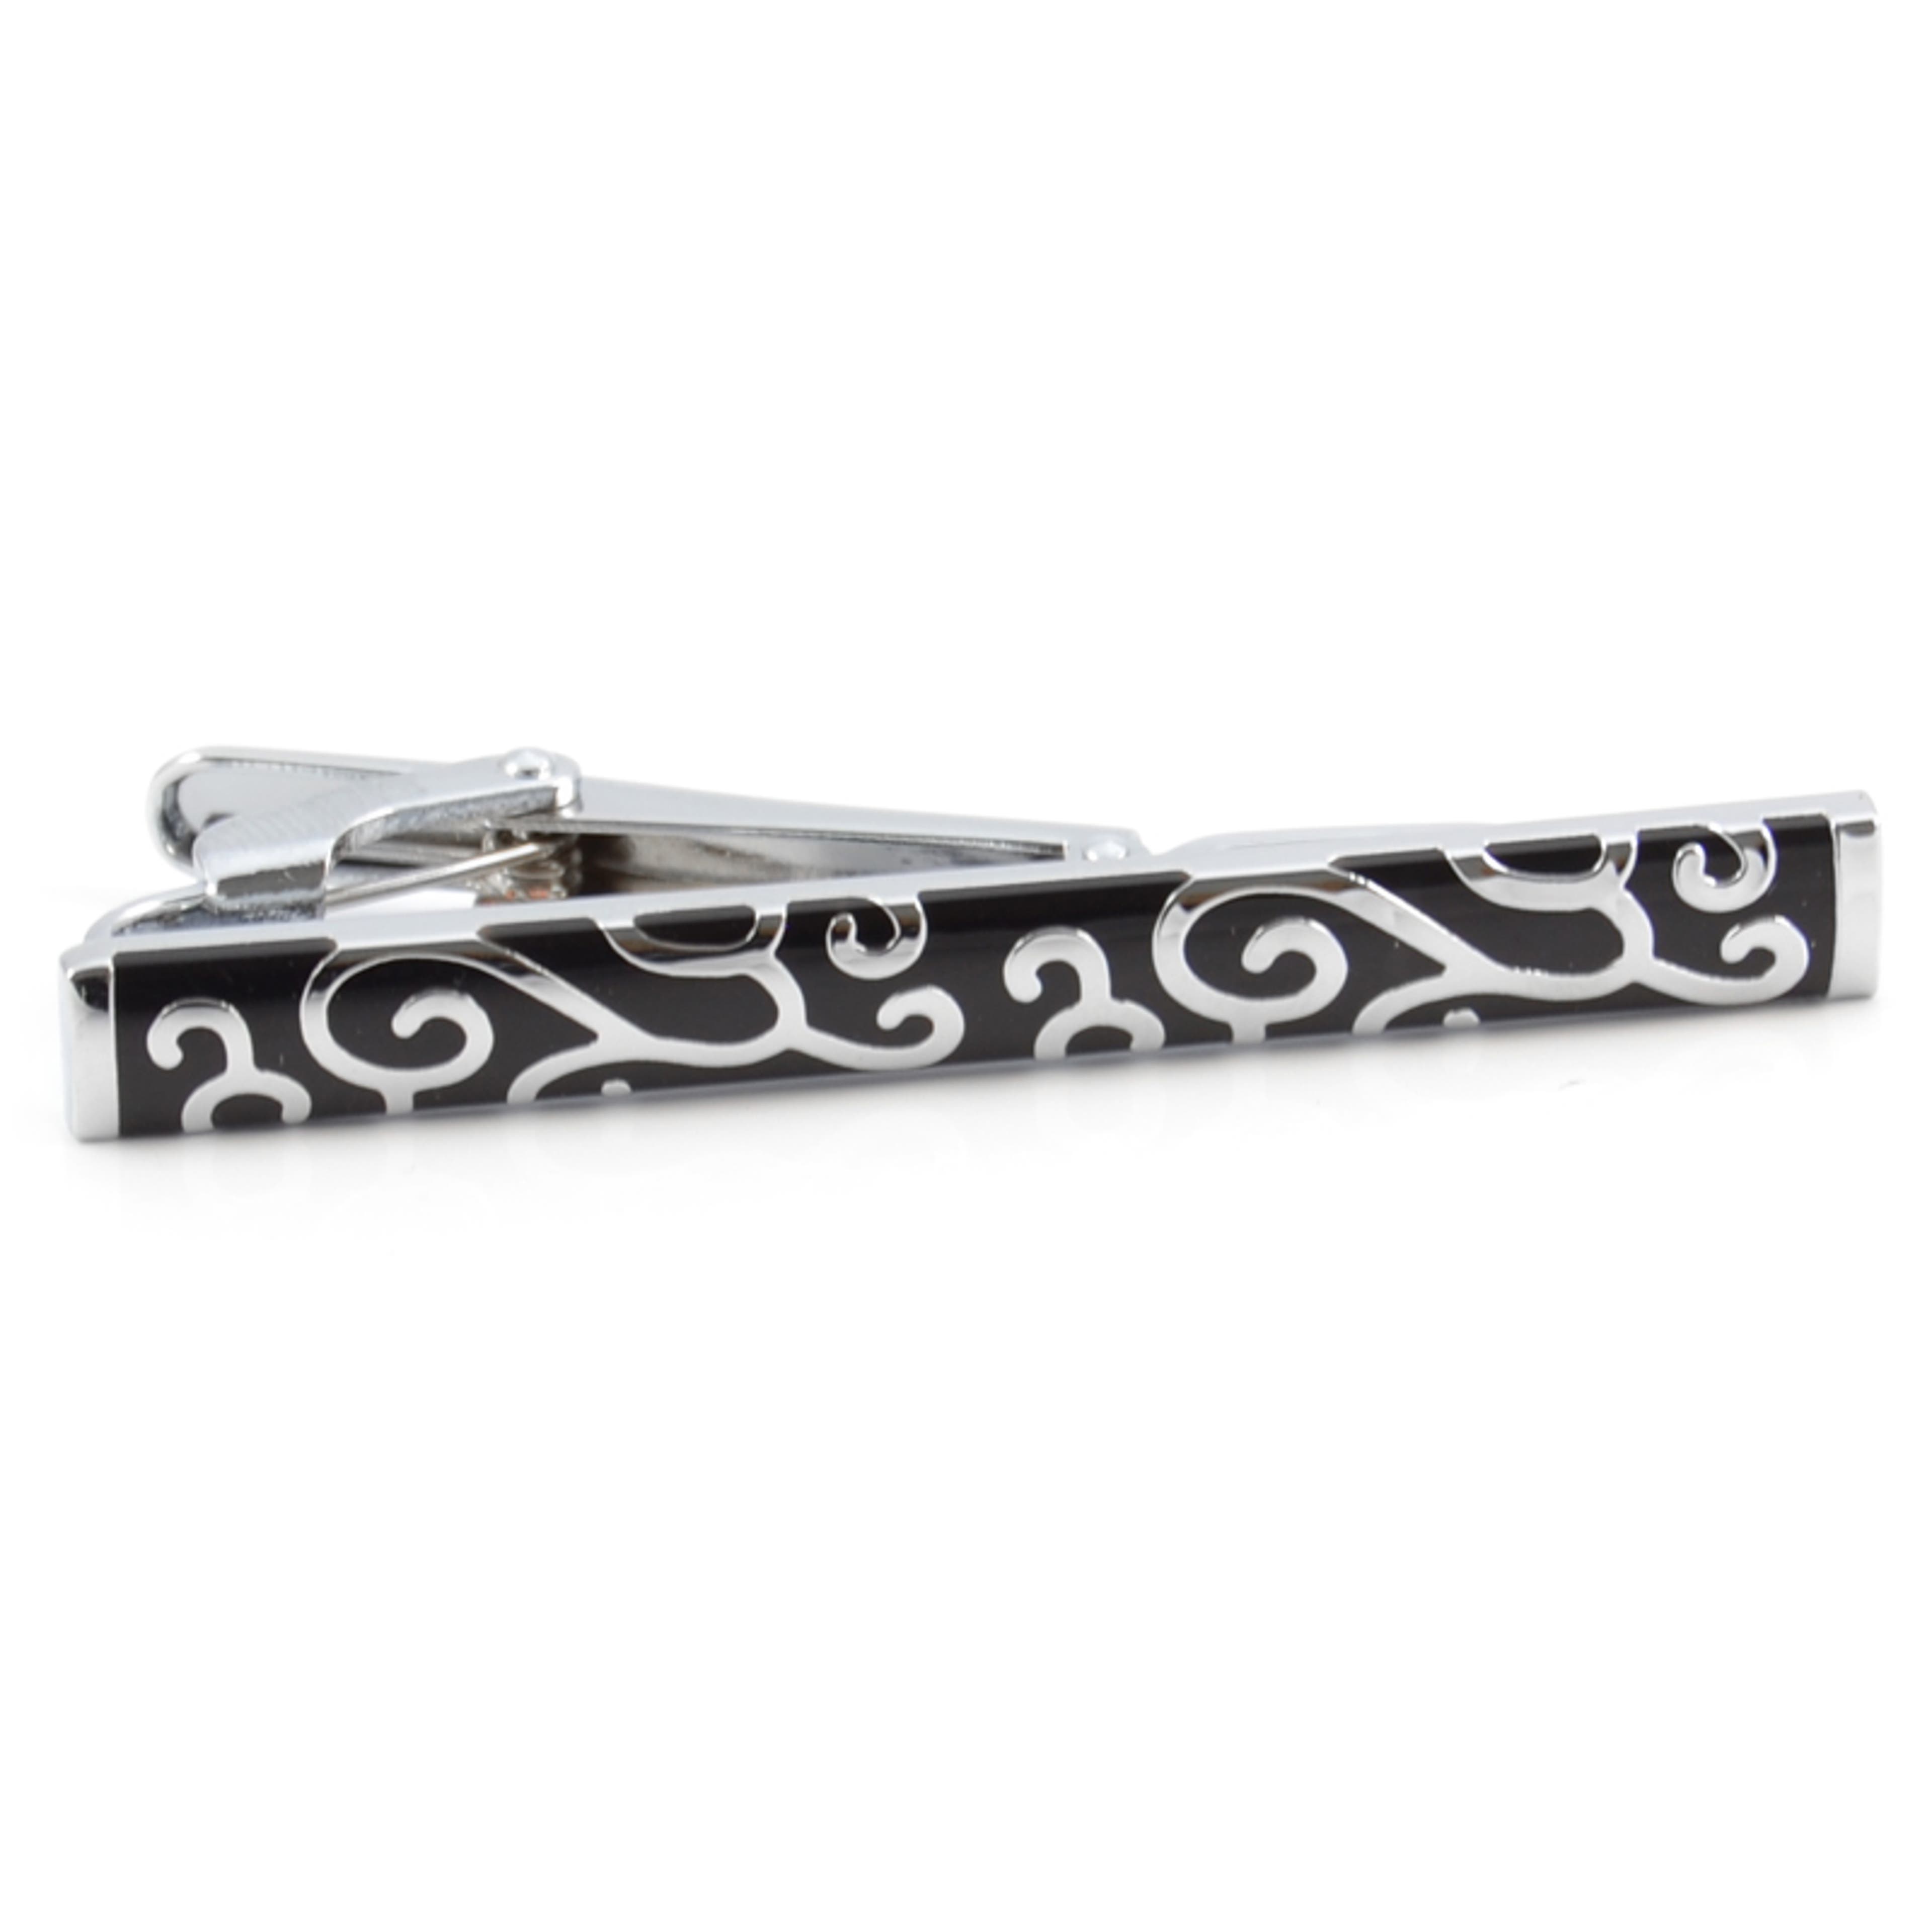 Black & Silver-Tone Polished Copper Patterned Tie Clip